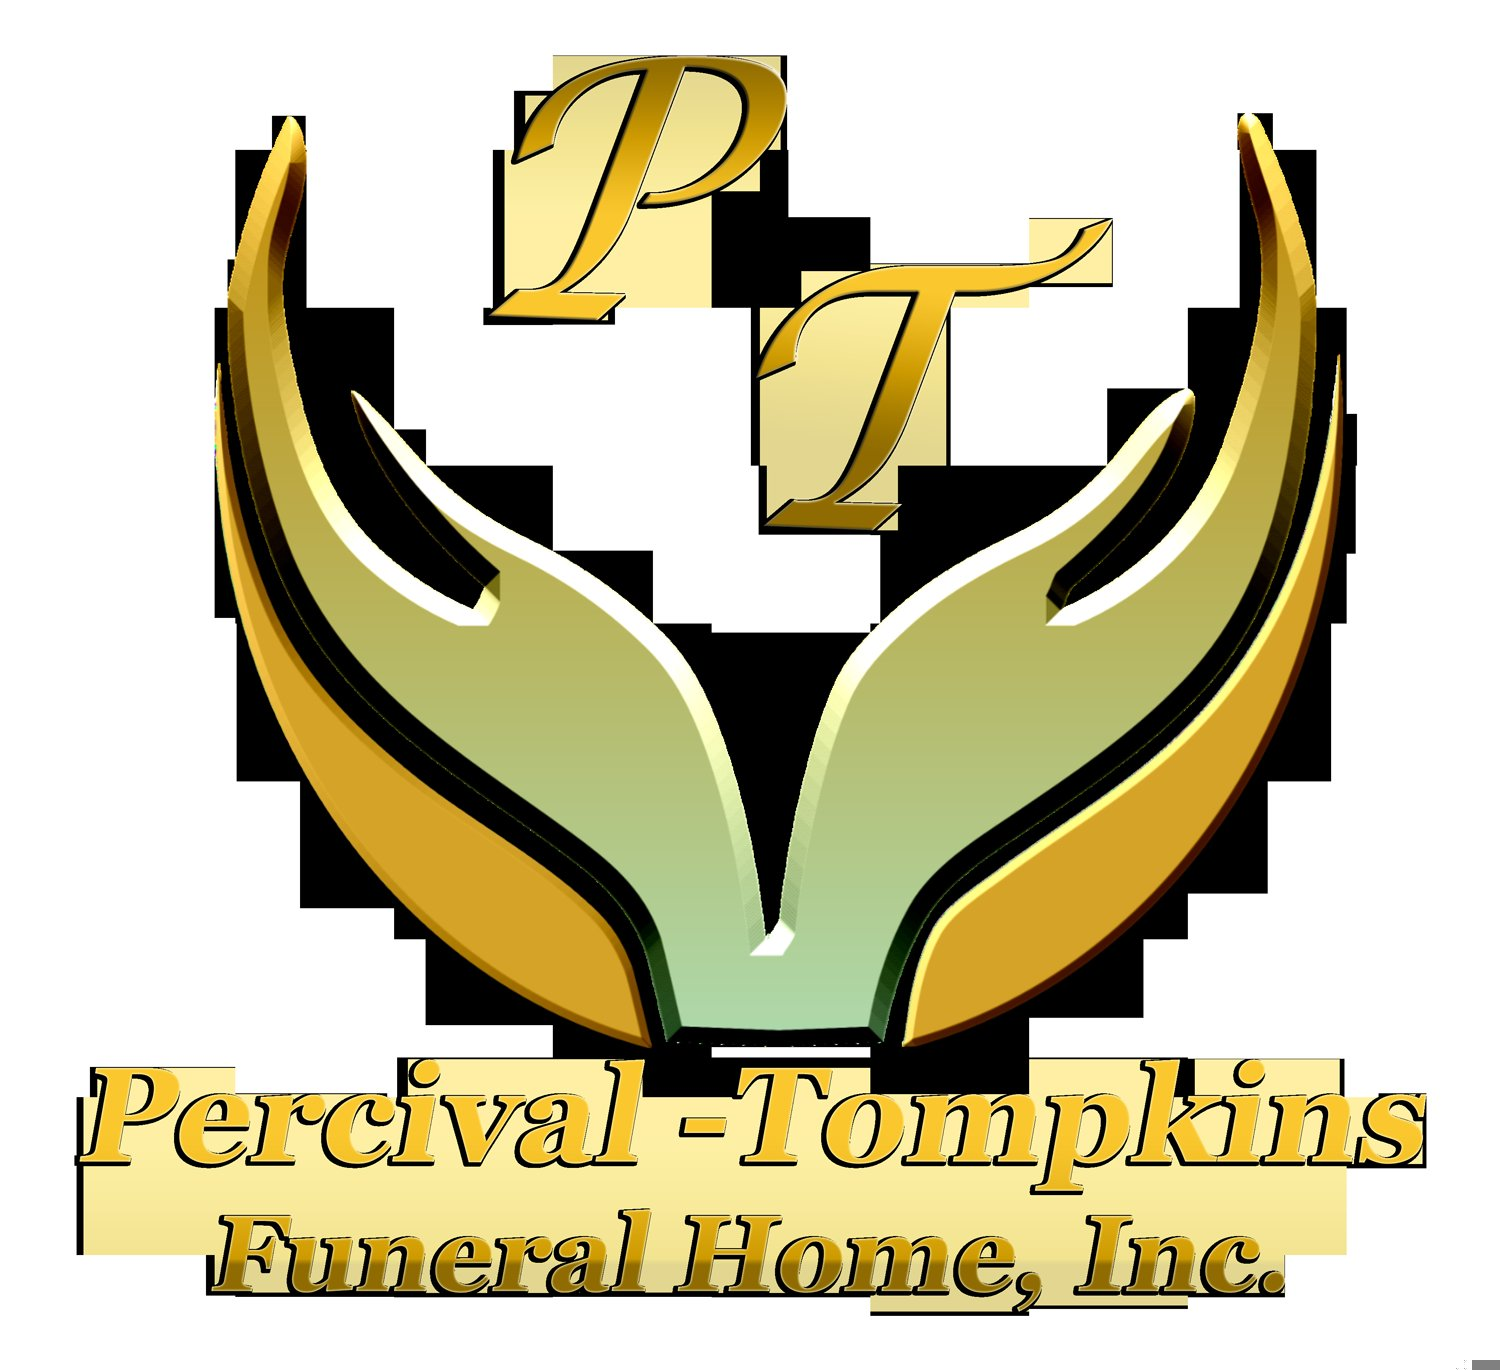 Percival-Tompkins Funeral Home Obituaries: Honoring Lives With Dignity